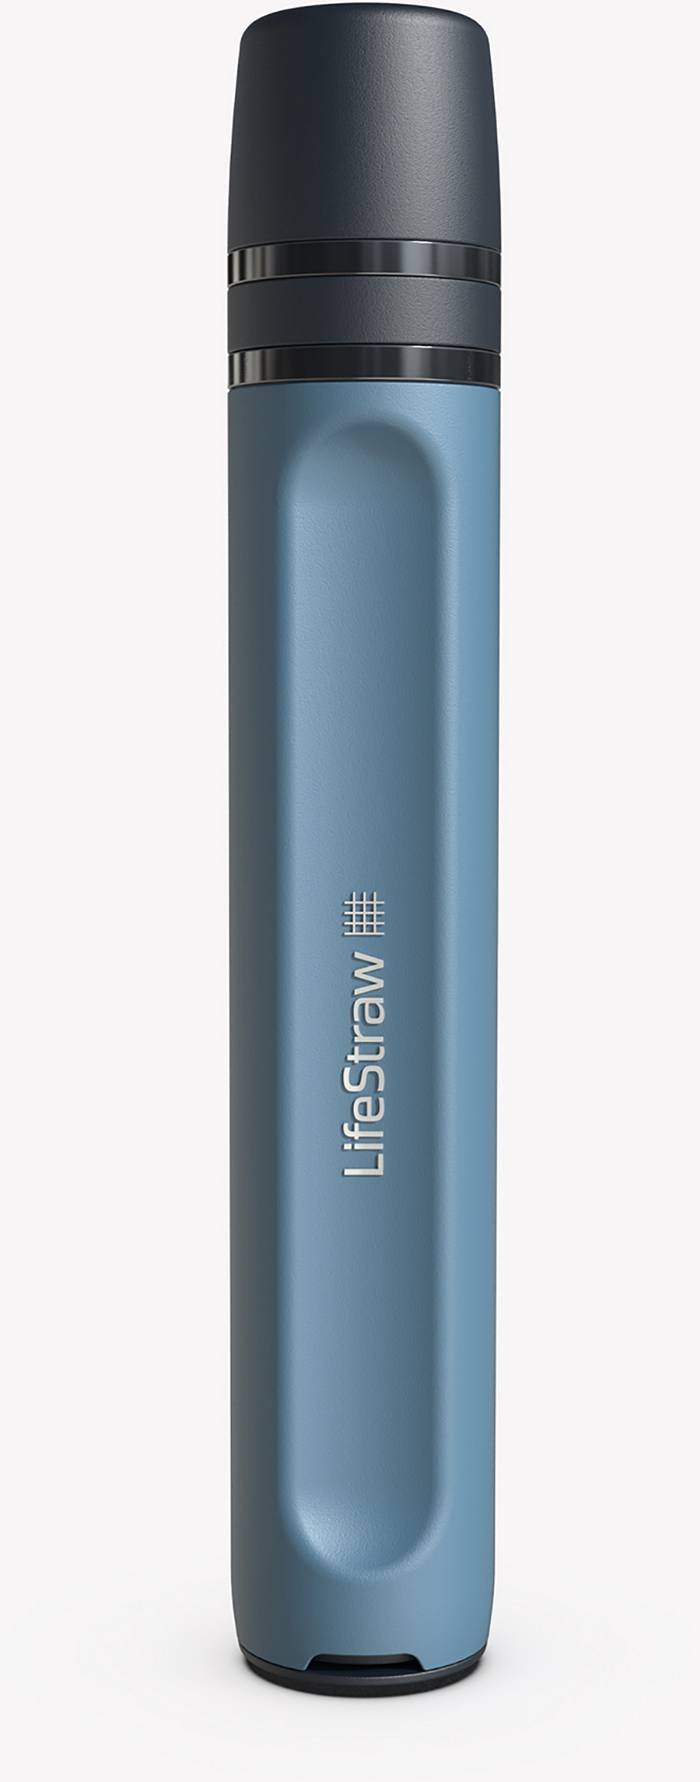 LifeStraw's Peak Series Water Filter Straw is a camping essential